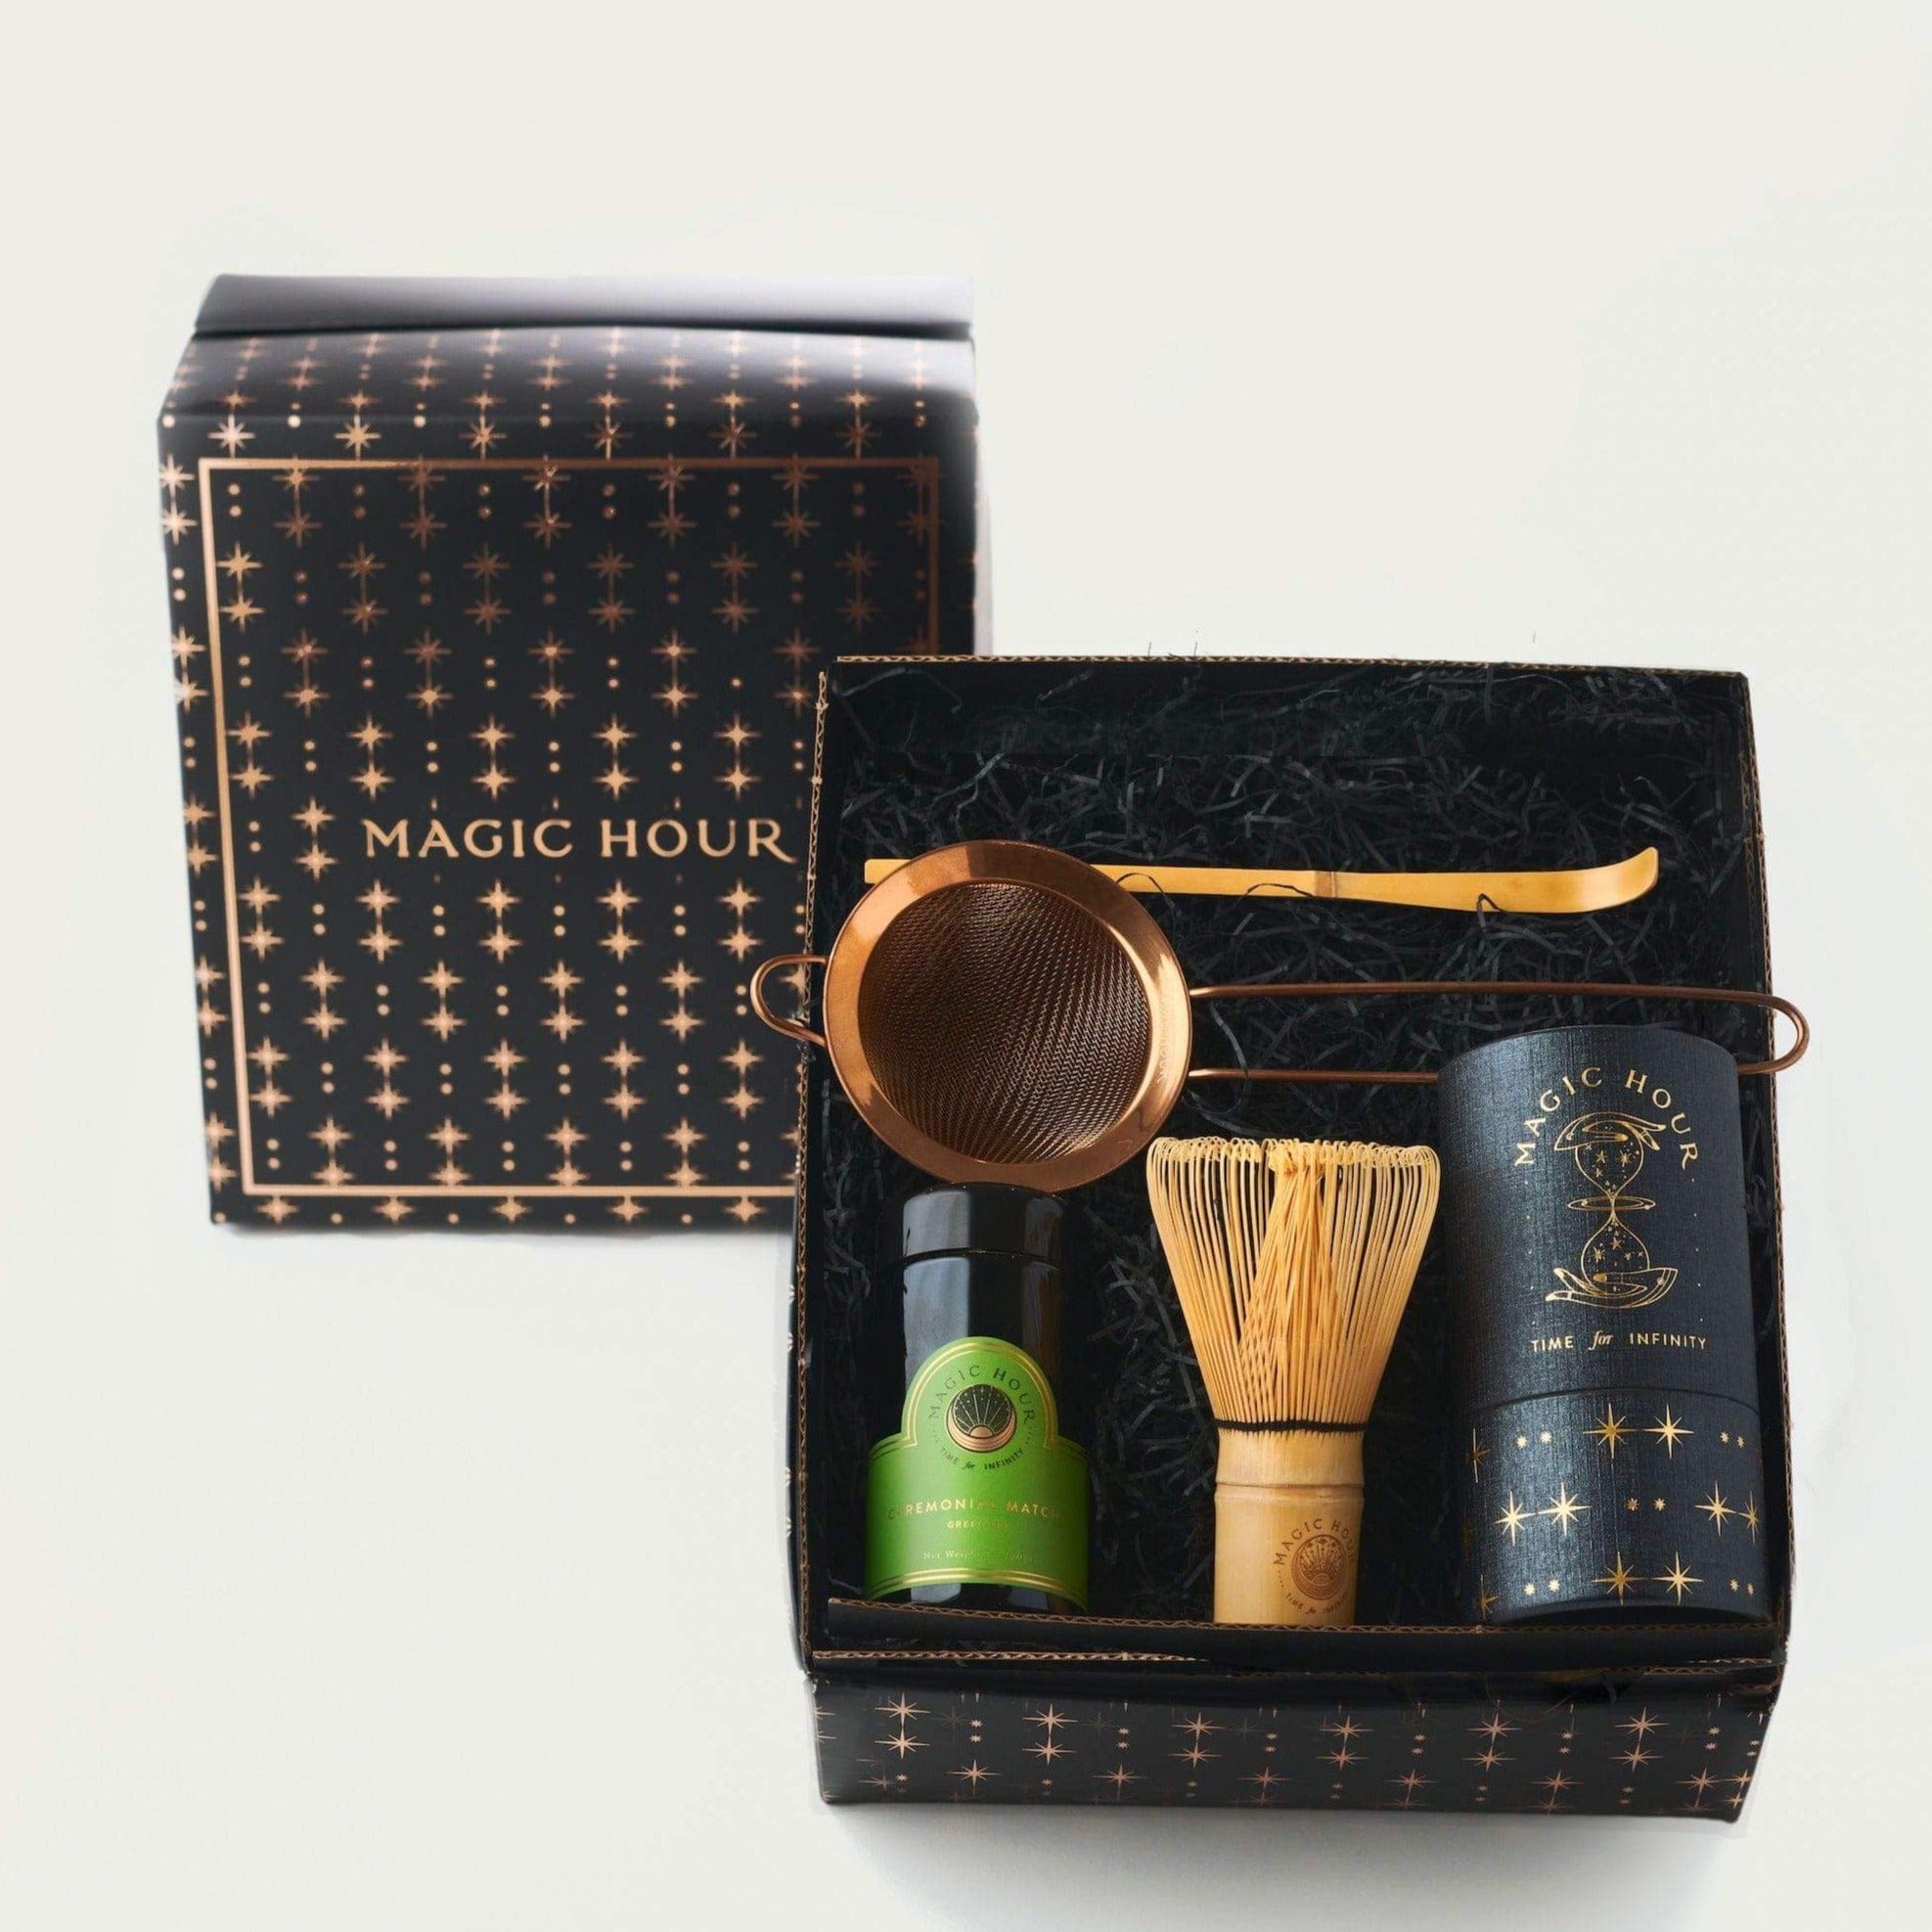 A gift box with a black and gold starry design featuring a bottle of organic tea, a matcha whisk, a gold tea strainer, and a box labeled "Ceremonial Matcha Traveler Gift Box" containing loose leaf tea. The box lid with the "Magic Hour" logo is partially removed and placed beside it.